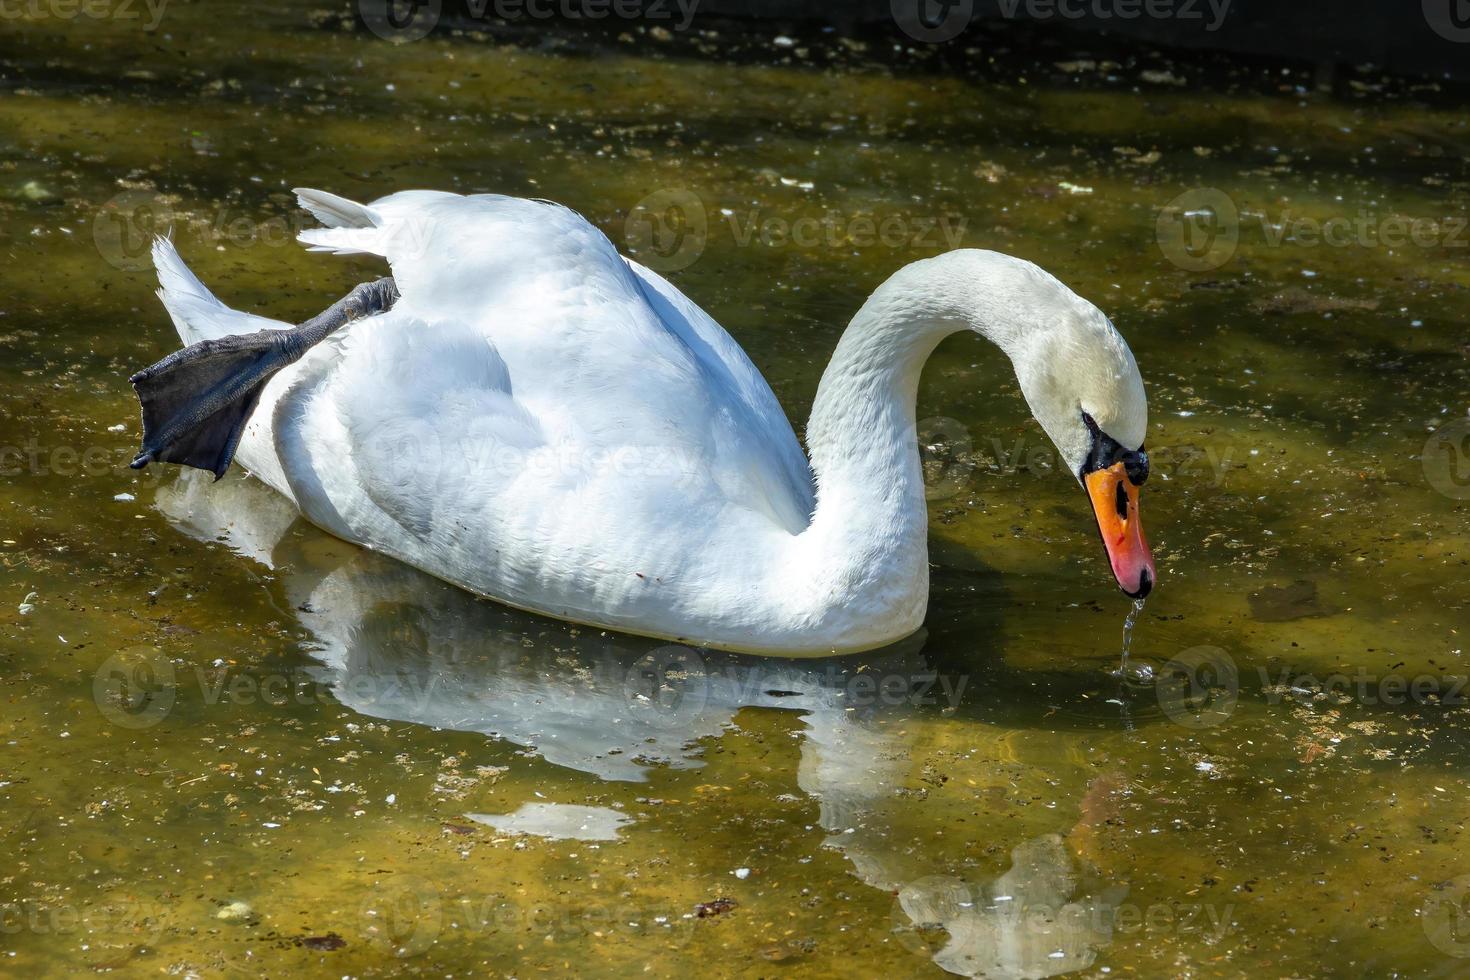 On a Sunny spring day, one Swan in the Park photo